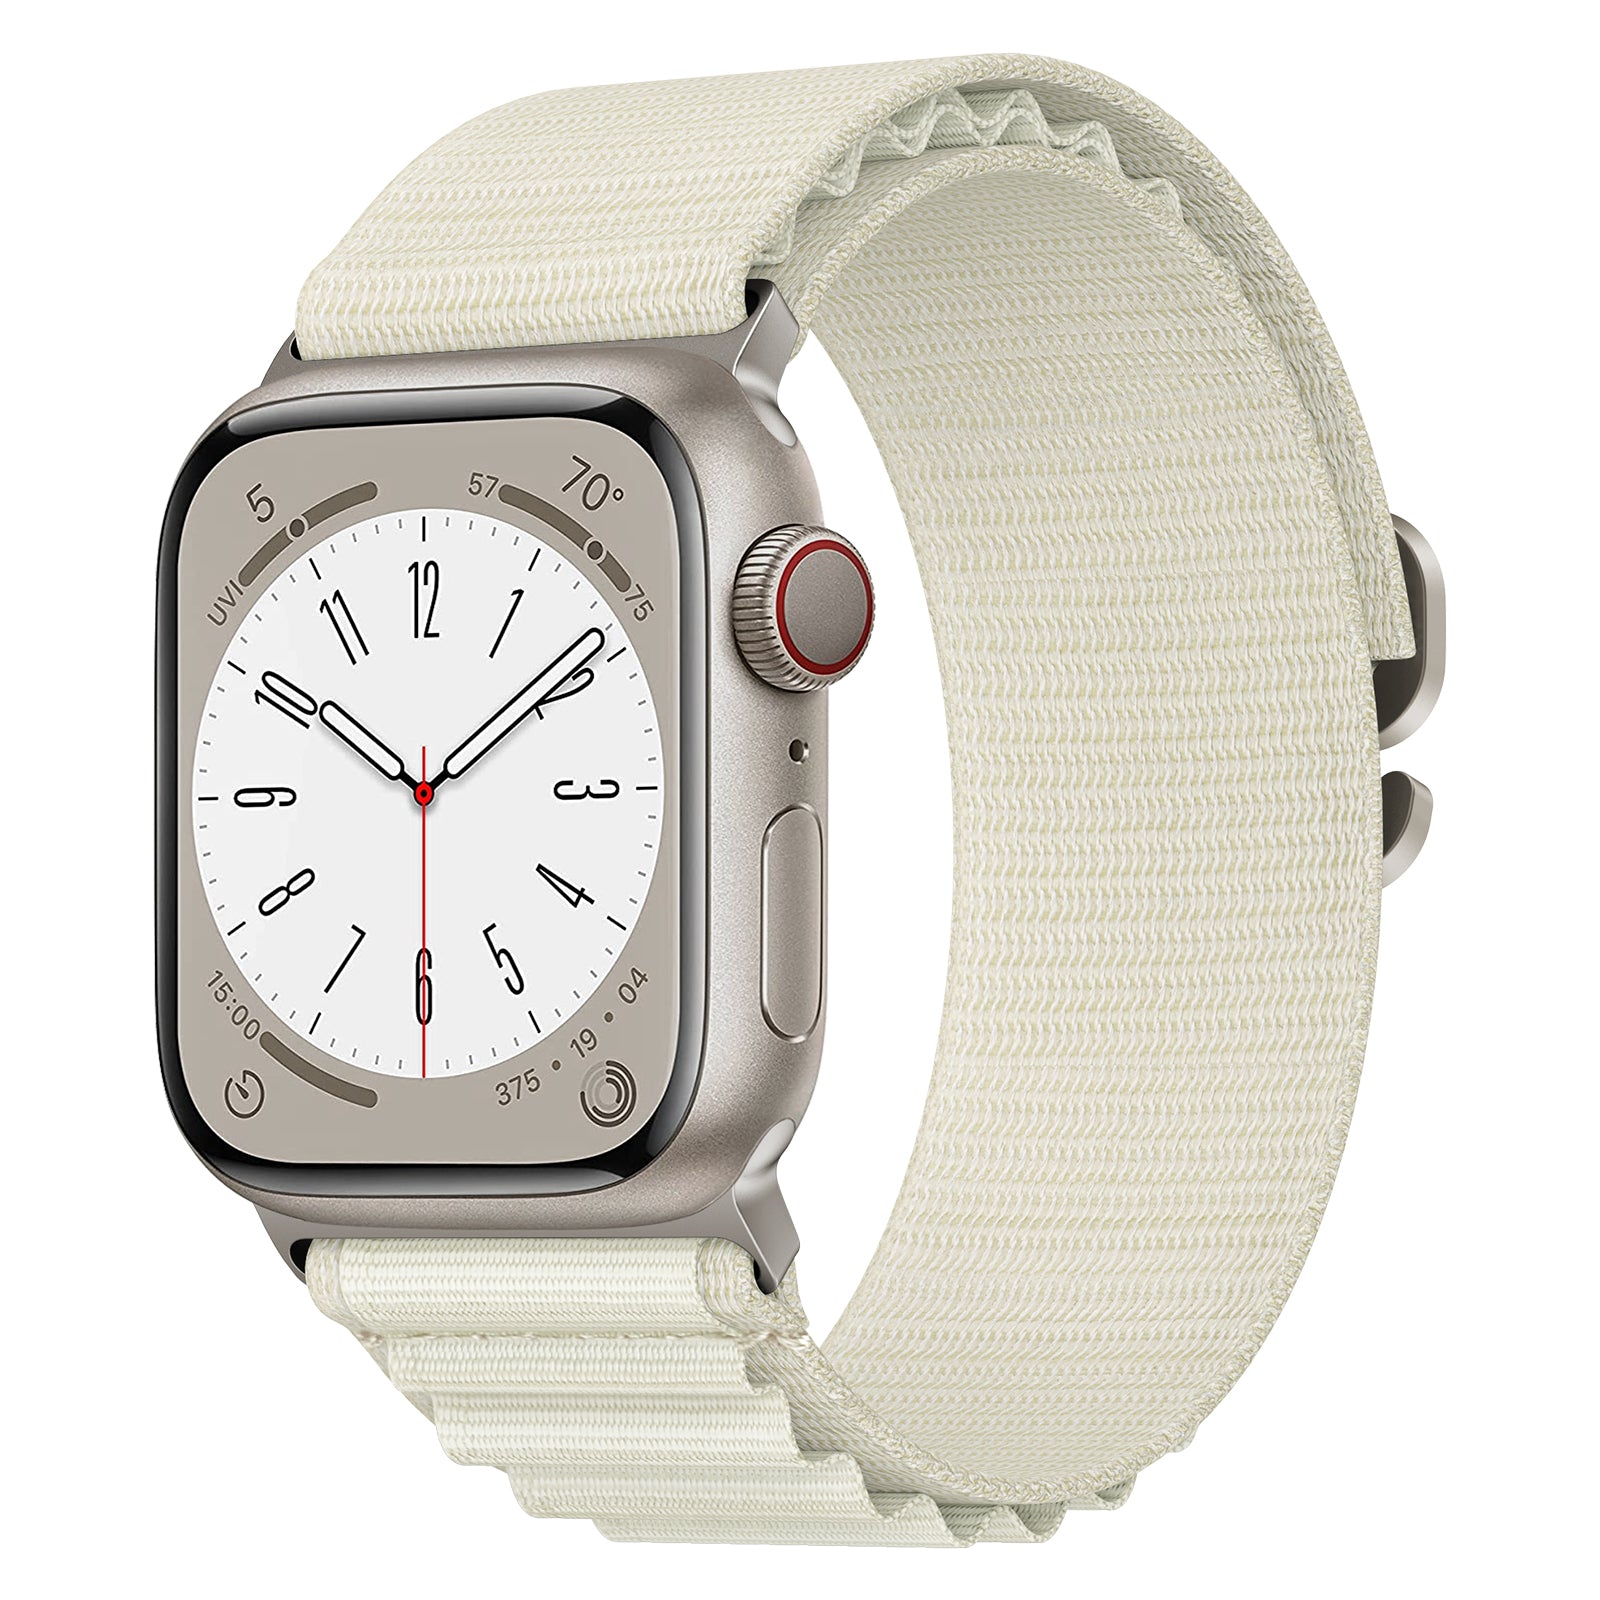 Nylon Alpine Loop band for Apple Watch white with watch